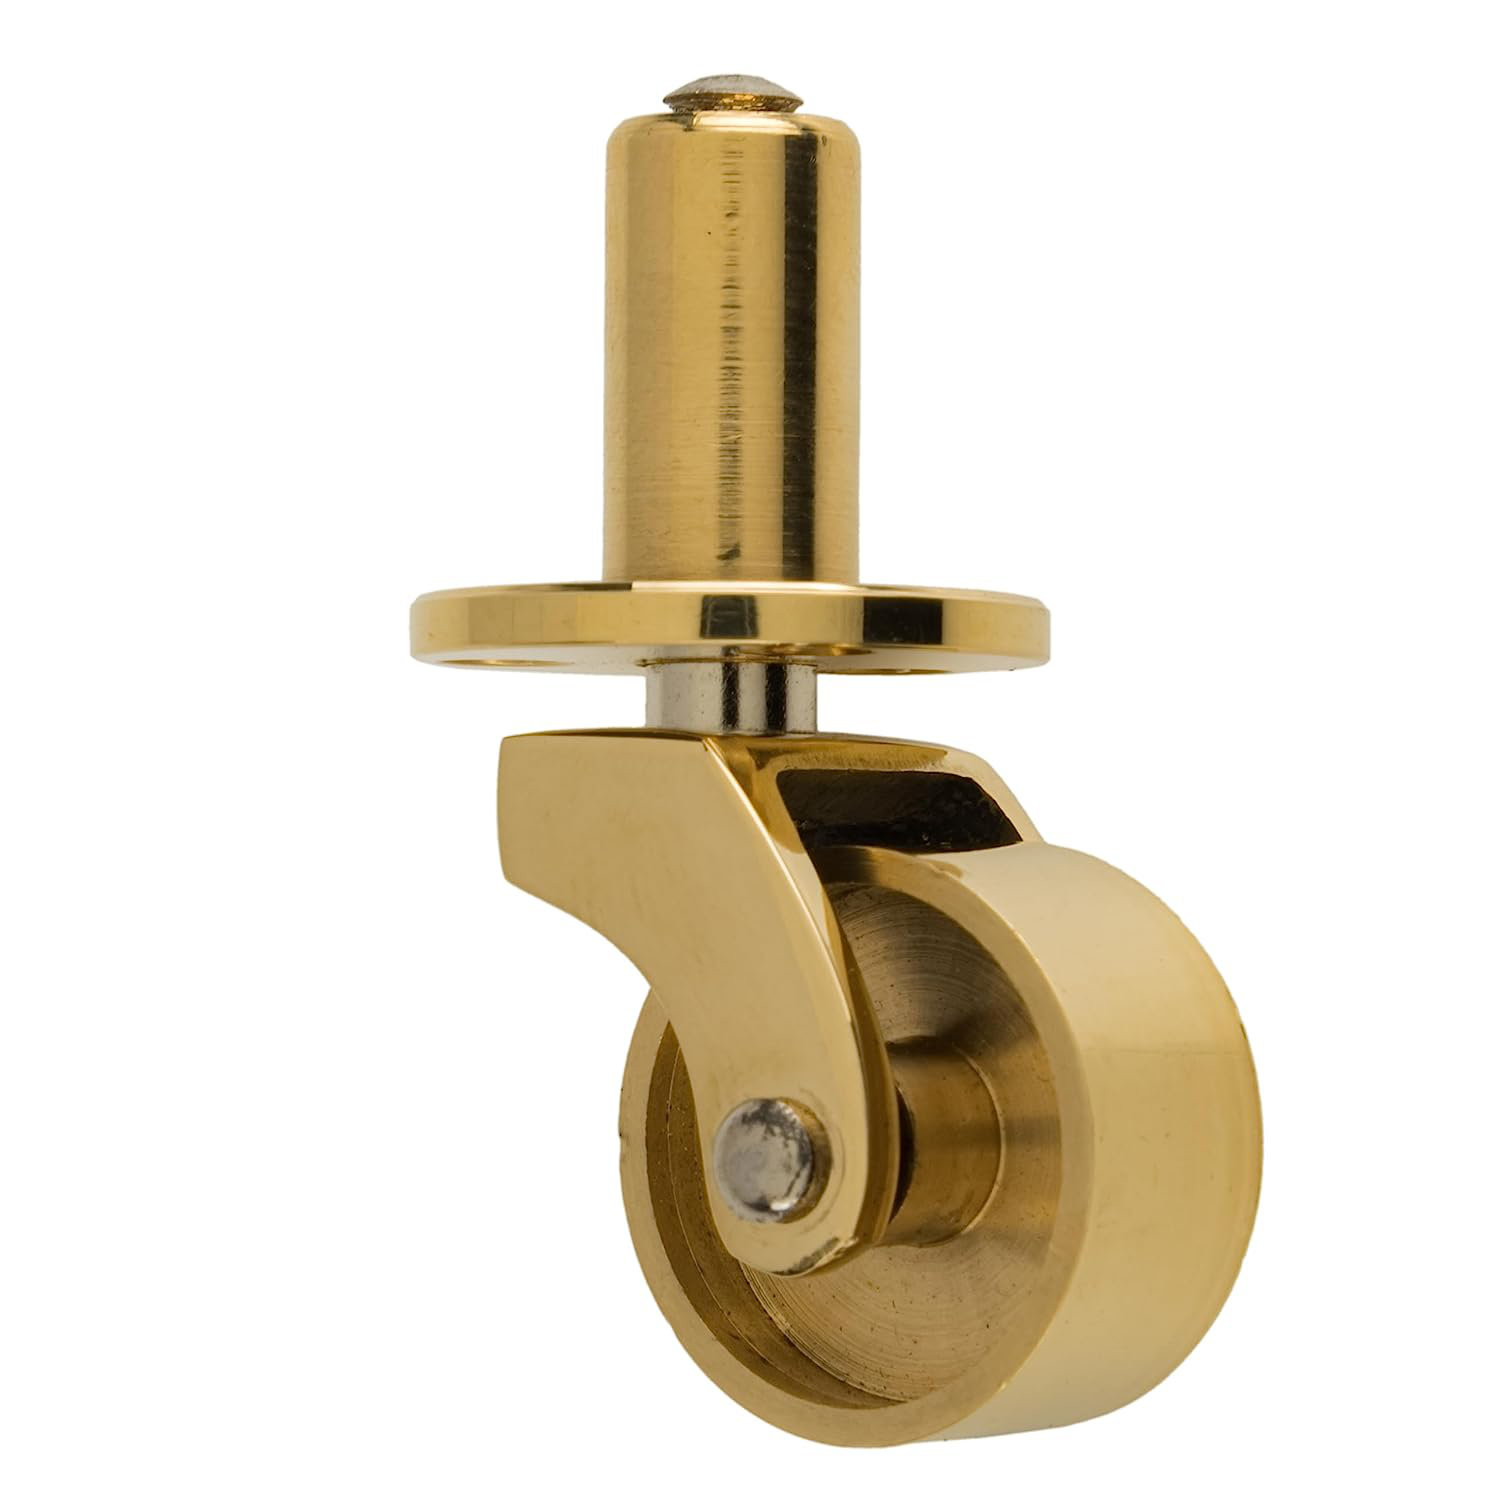 Generic Ball casters 2 inch Without Brake, Antique Brass Casters